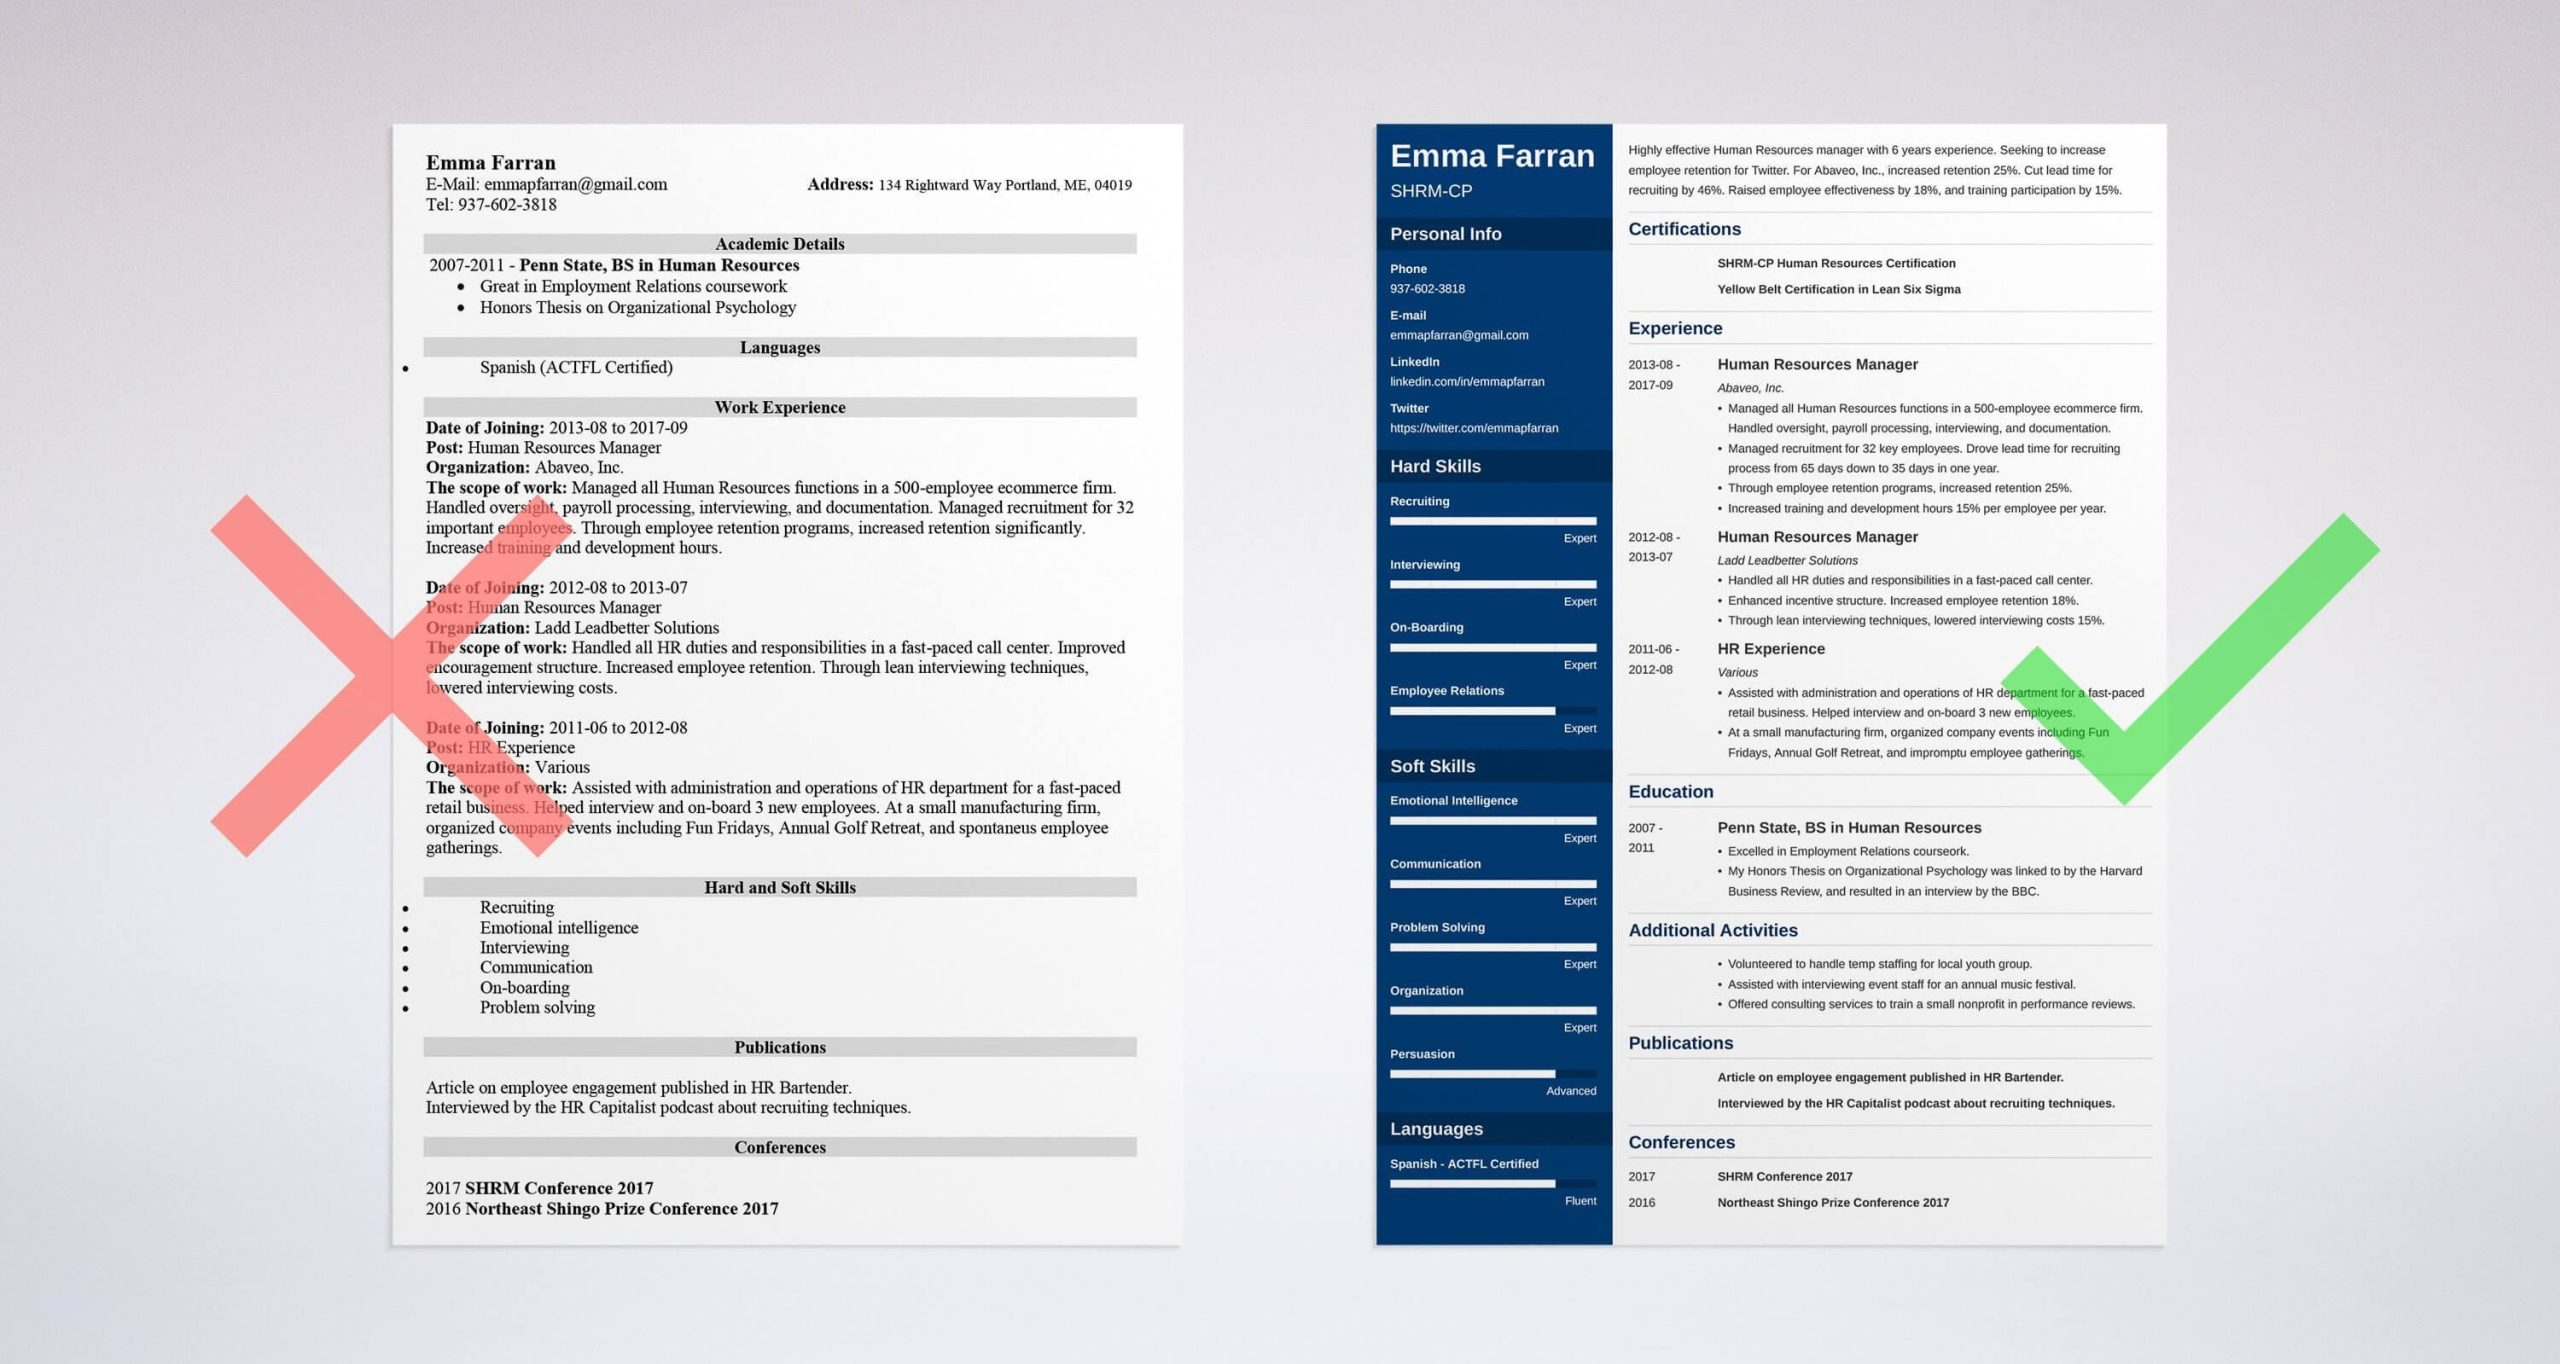 Global Human Resources Specialist Resume Samples Human Resources (hr) Resume Examples & Guide (lancarrezekiq25 Tips)